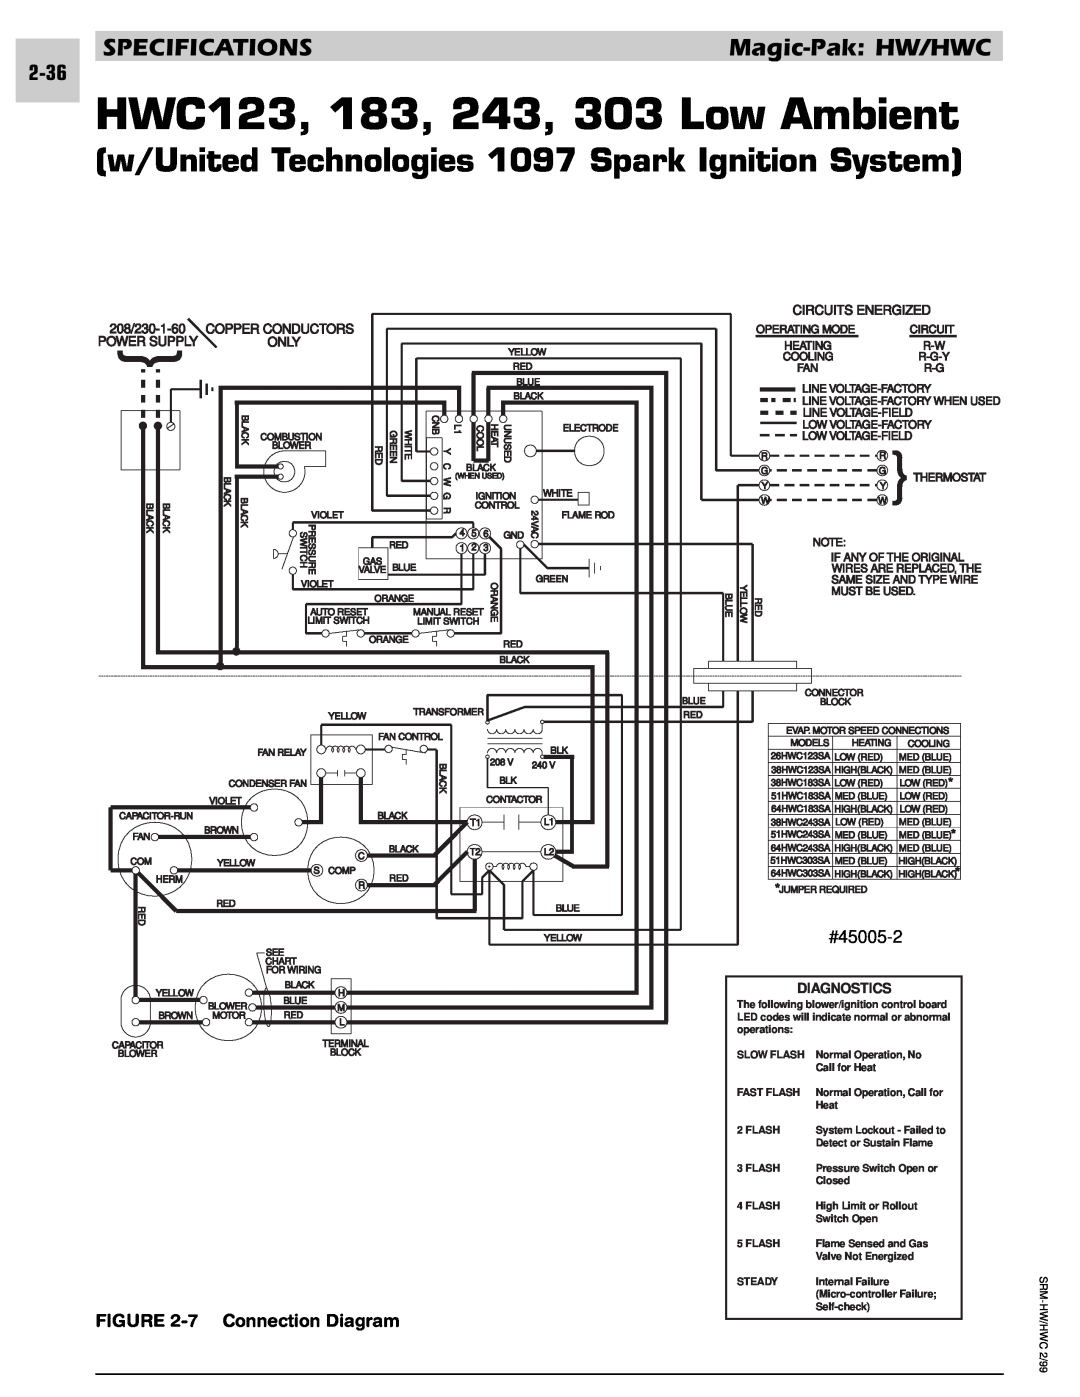 Armstrong World Industries 182 HWC123, 183, 243, 303 Low Ambient, w/United Technologies 1097 Spark Ignition System, Only 